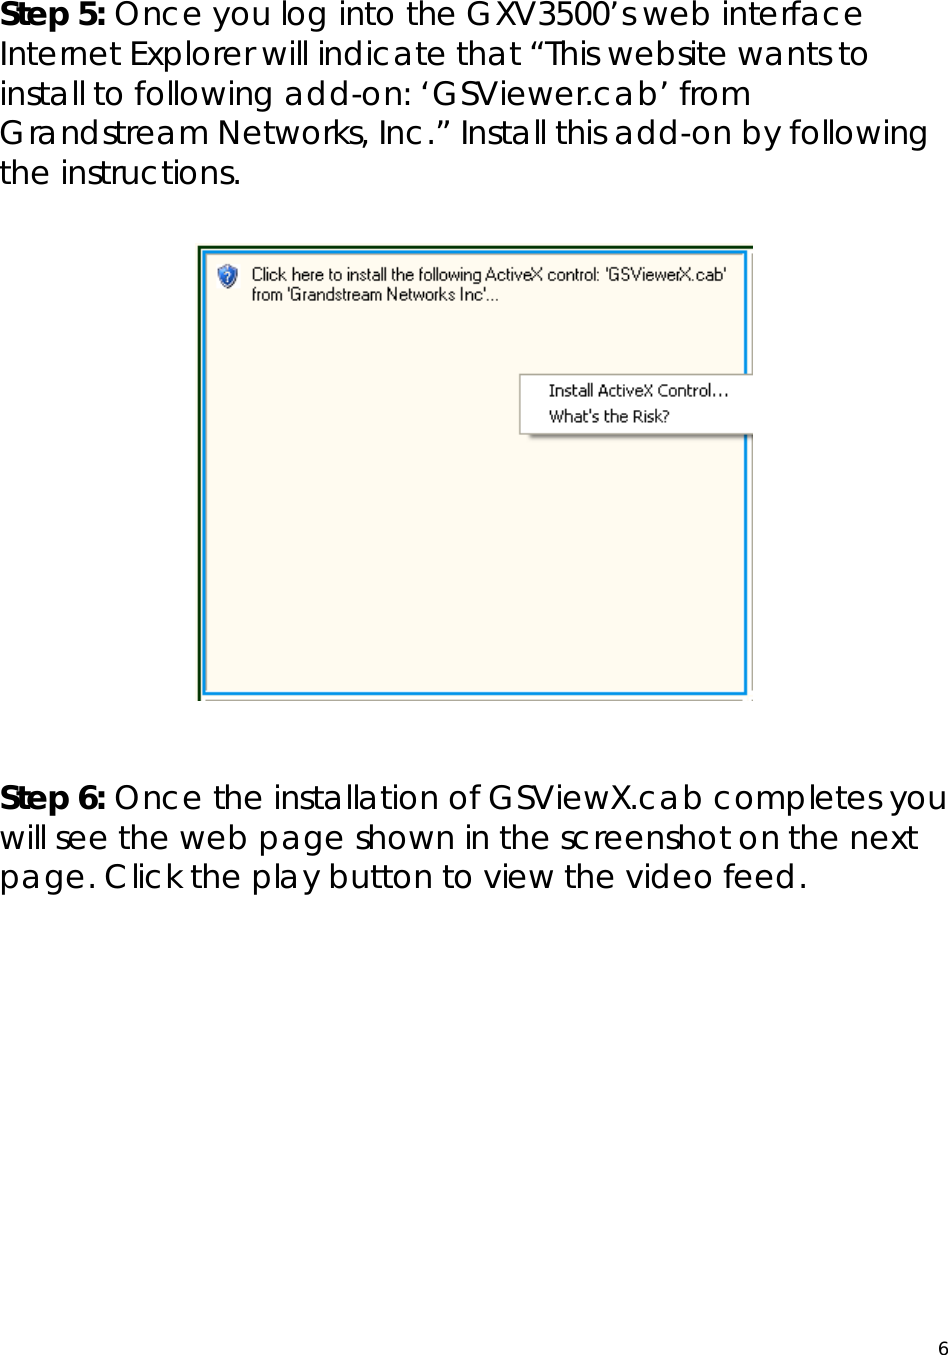  6 Step 5: Once you log into the GXV3500’s web interface Internet Explorer will indicate that “This website wants to install to following add-on: ‘GSViewer.cab’ from Grandstream Networks, Inc.” Install this add-on by following the instructions.    Step 6: Once the installation of GSViewX.cab completes you will see the web page shown in the screenshot on the next page. Click the play button to view the video feed.         